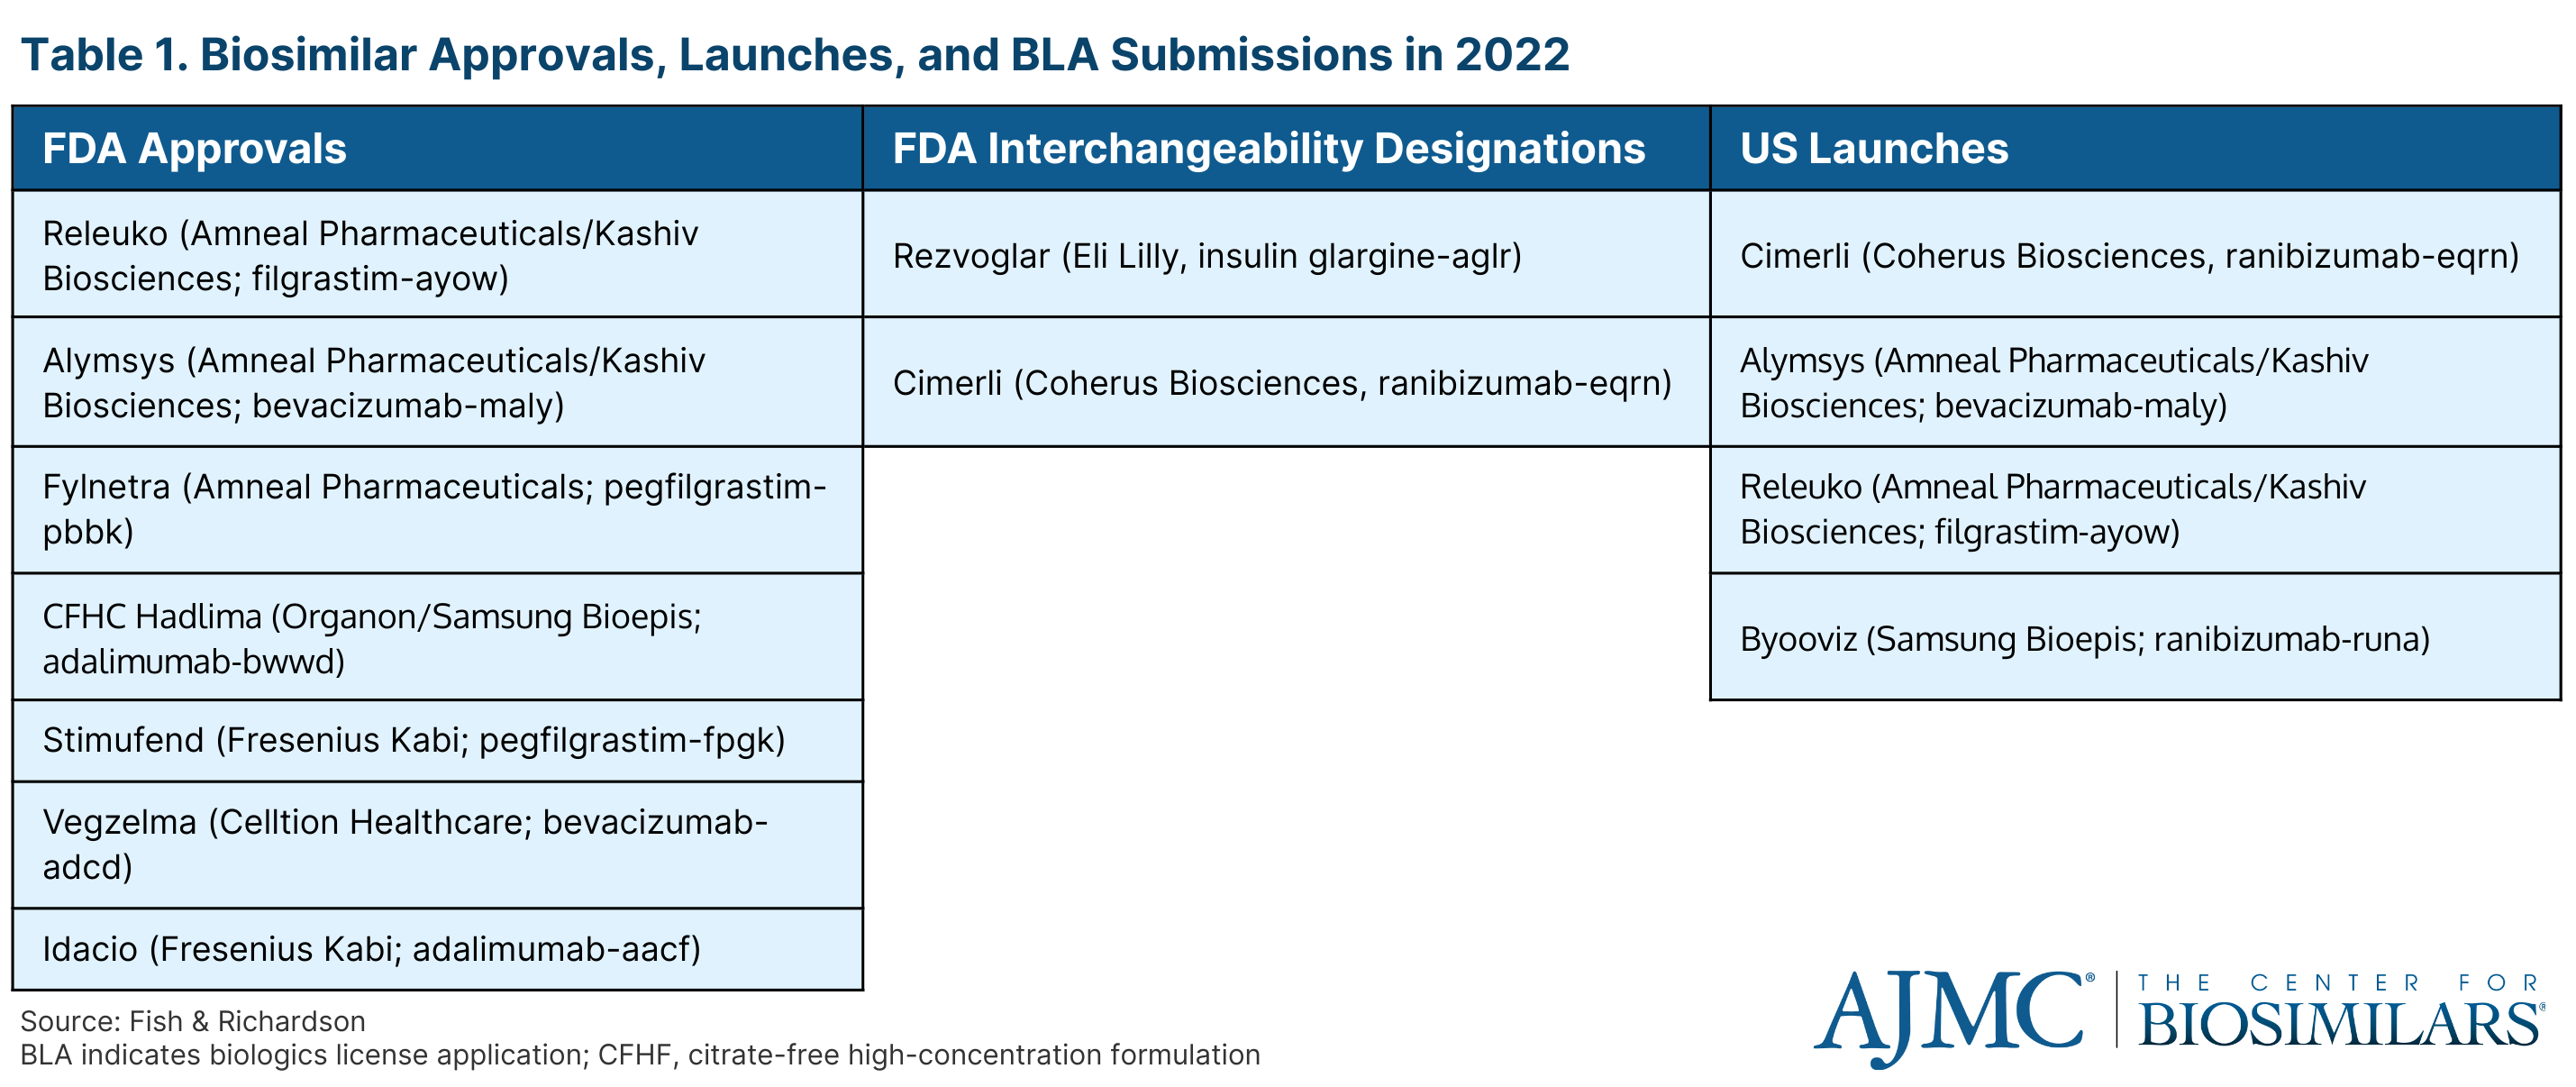 Table 1. Biosimilar Approvals, Launches, and BLA Submissions in 2022